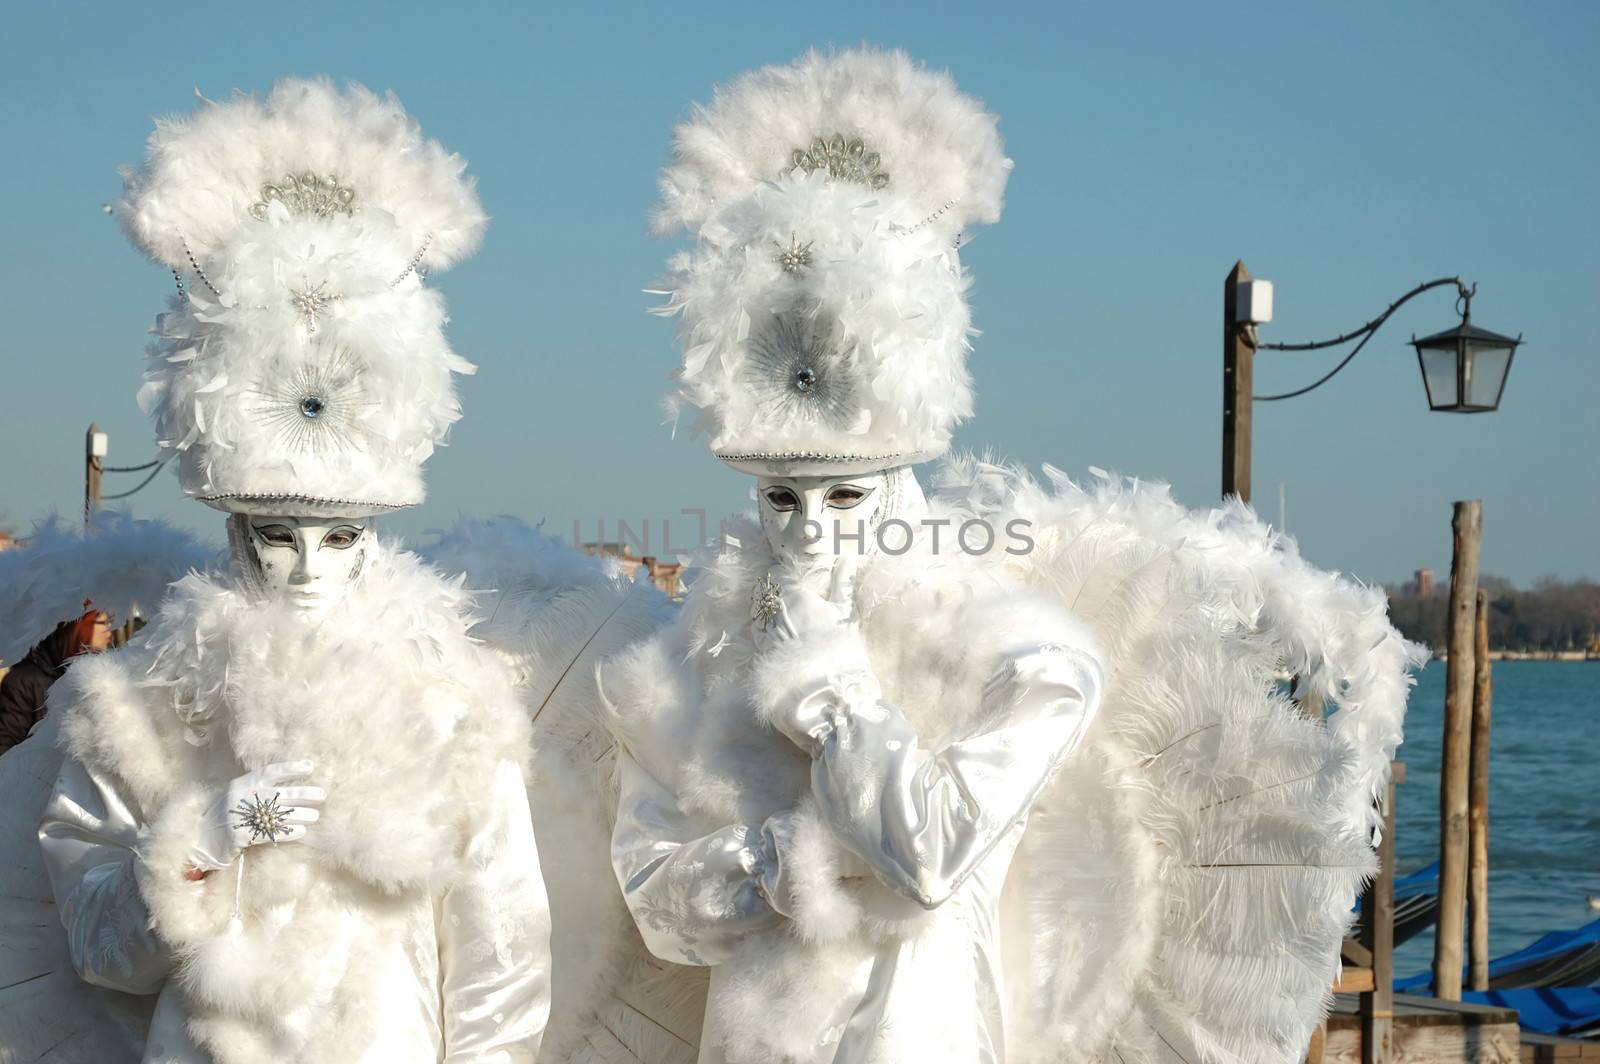 VENICE - MARCH 8:Two masks -white angels at St. Mark's Square during the Carnival of Venice on March 8, 2011.The annual carnival was held in 2011 from February 26th to March 8th